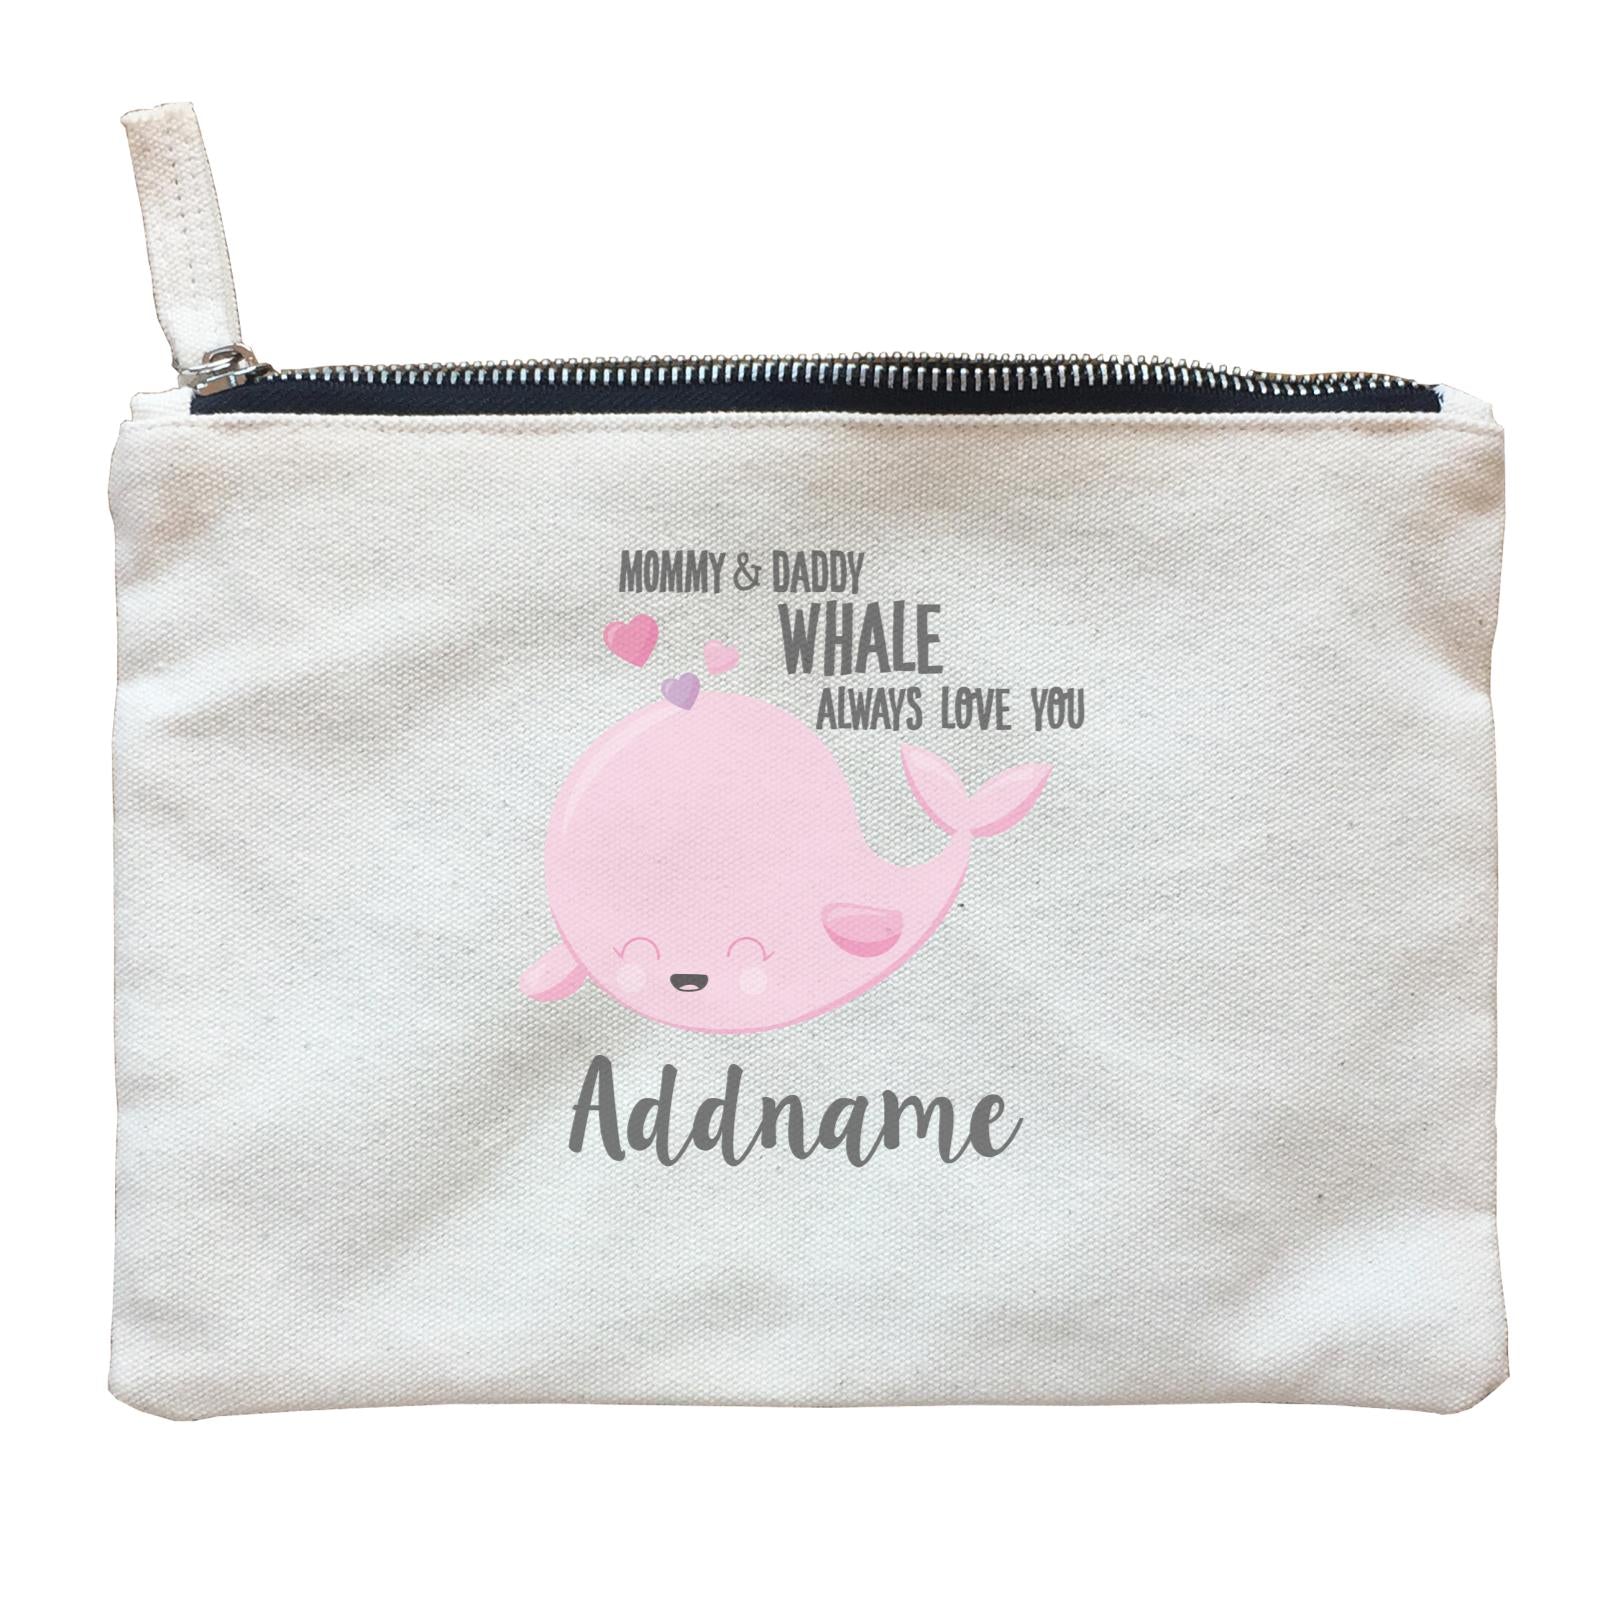 Cute Sea Animals Mommy & Daddy Whale Always Love You Addname Zipper Pouch